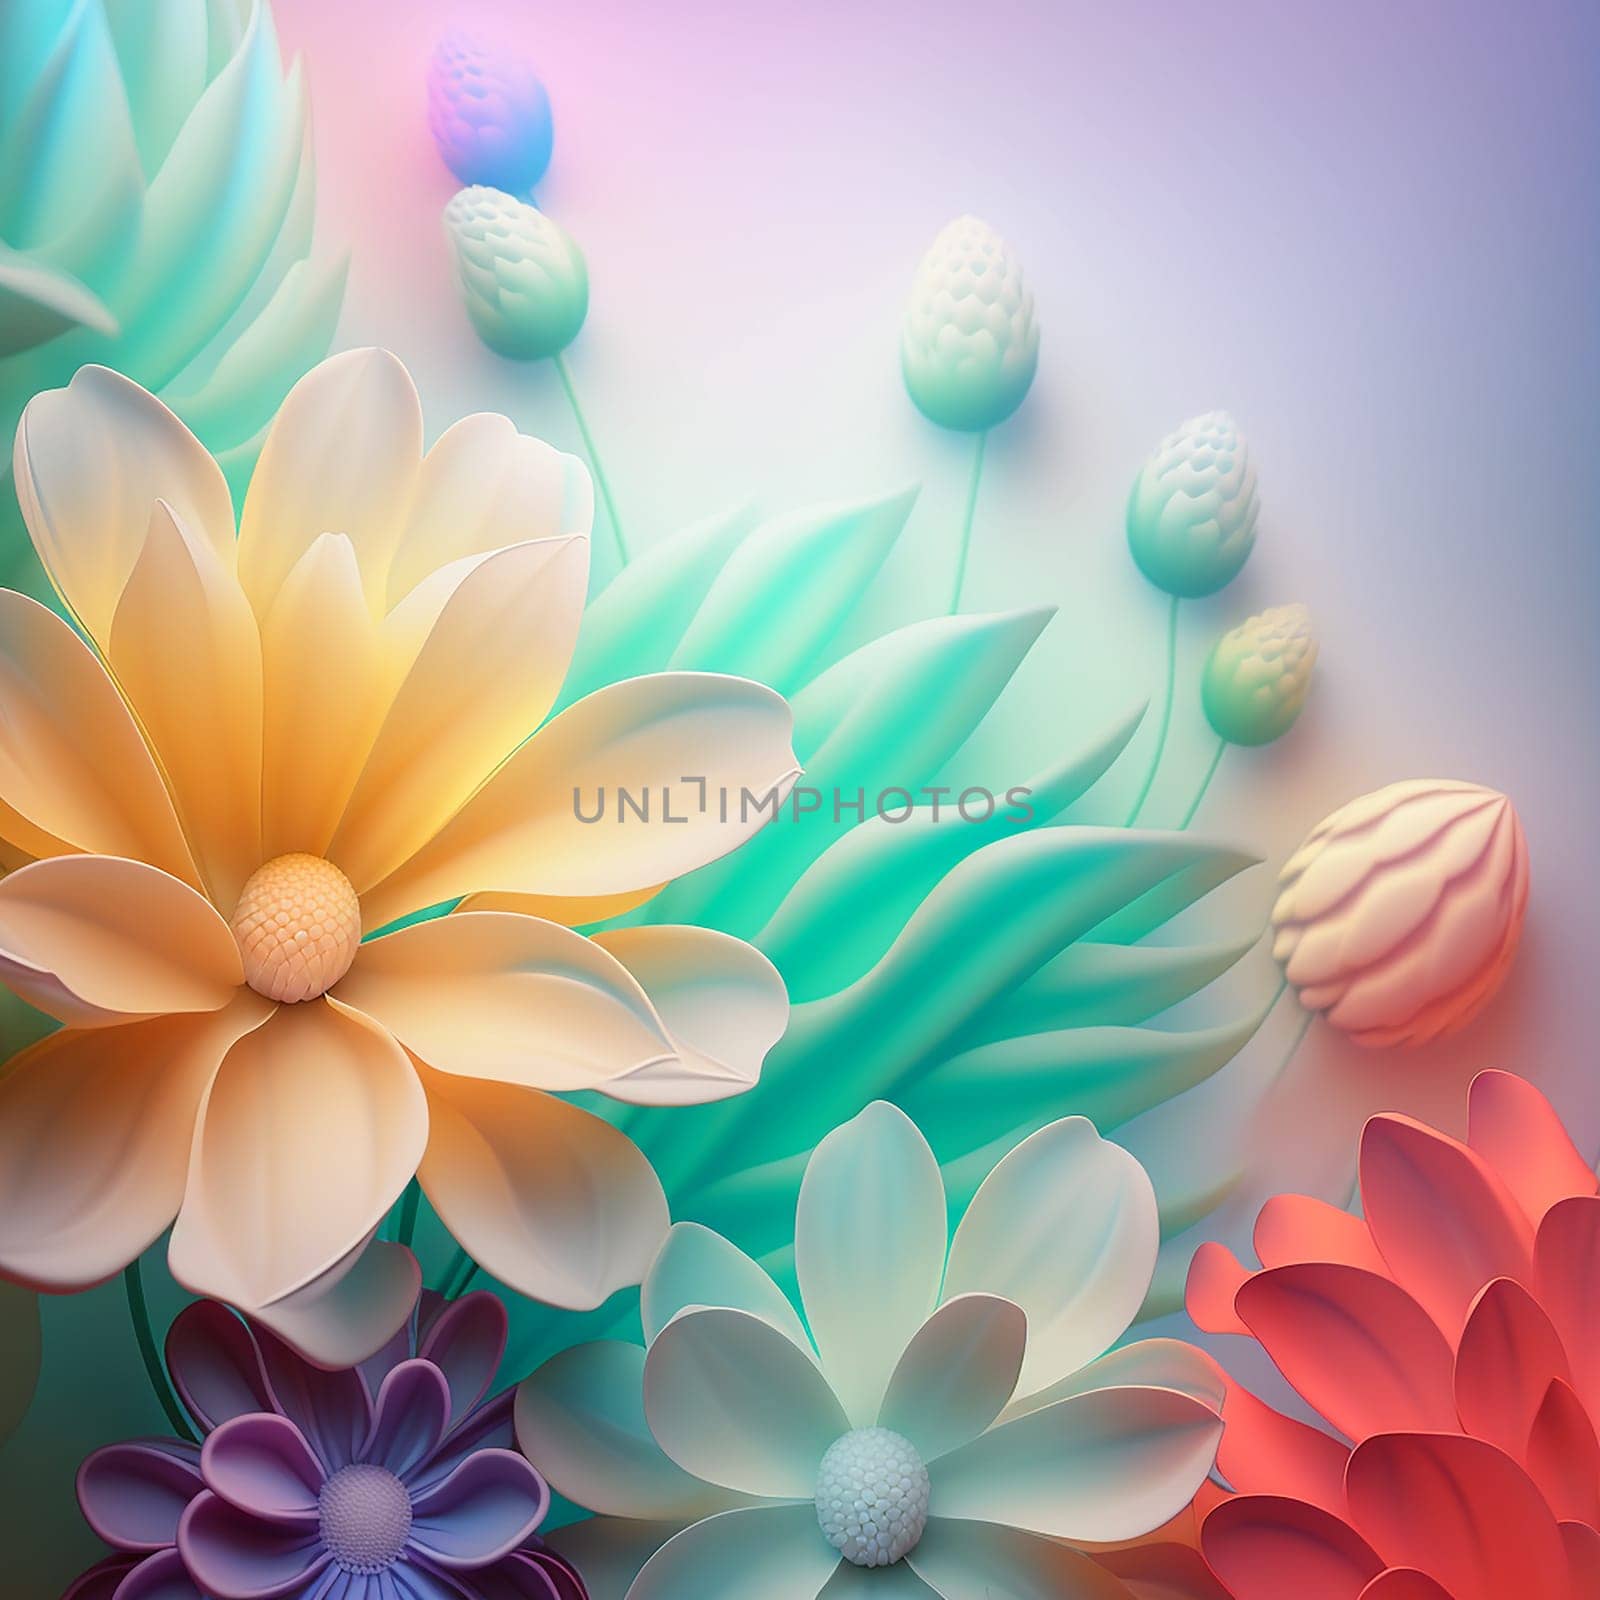 Soft floral design flowers in pastel tones for background,Copy space for text, 3d design, modern colorful style beautiful flowers by Annebel146